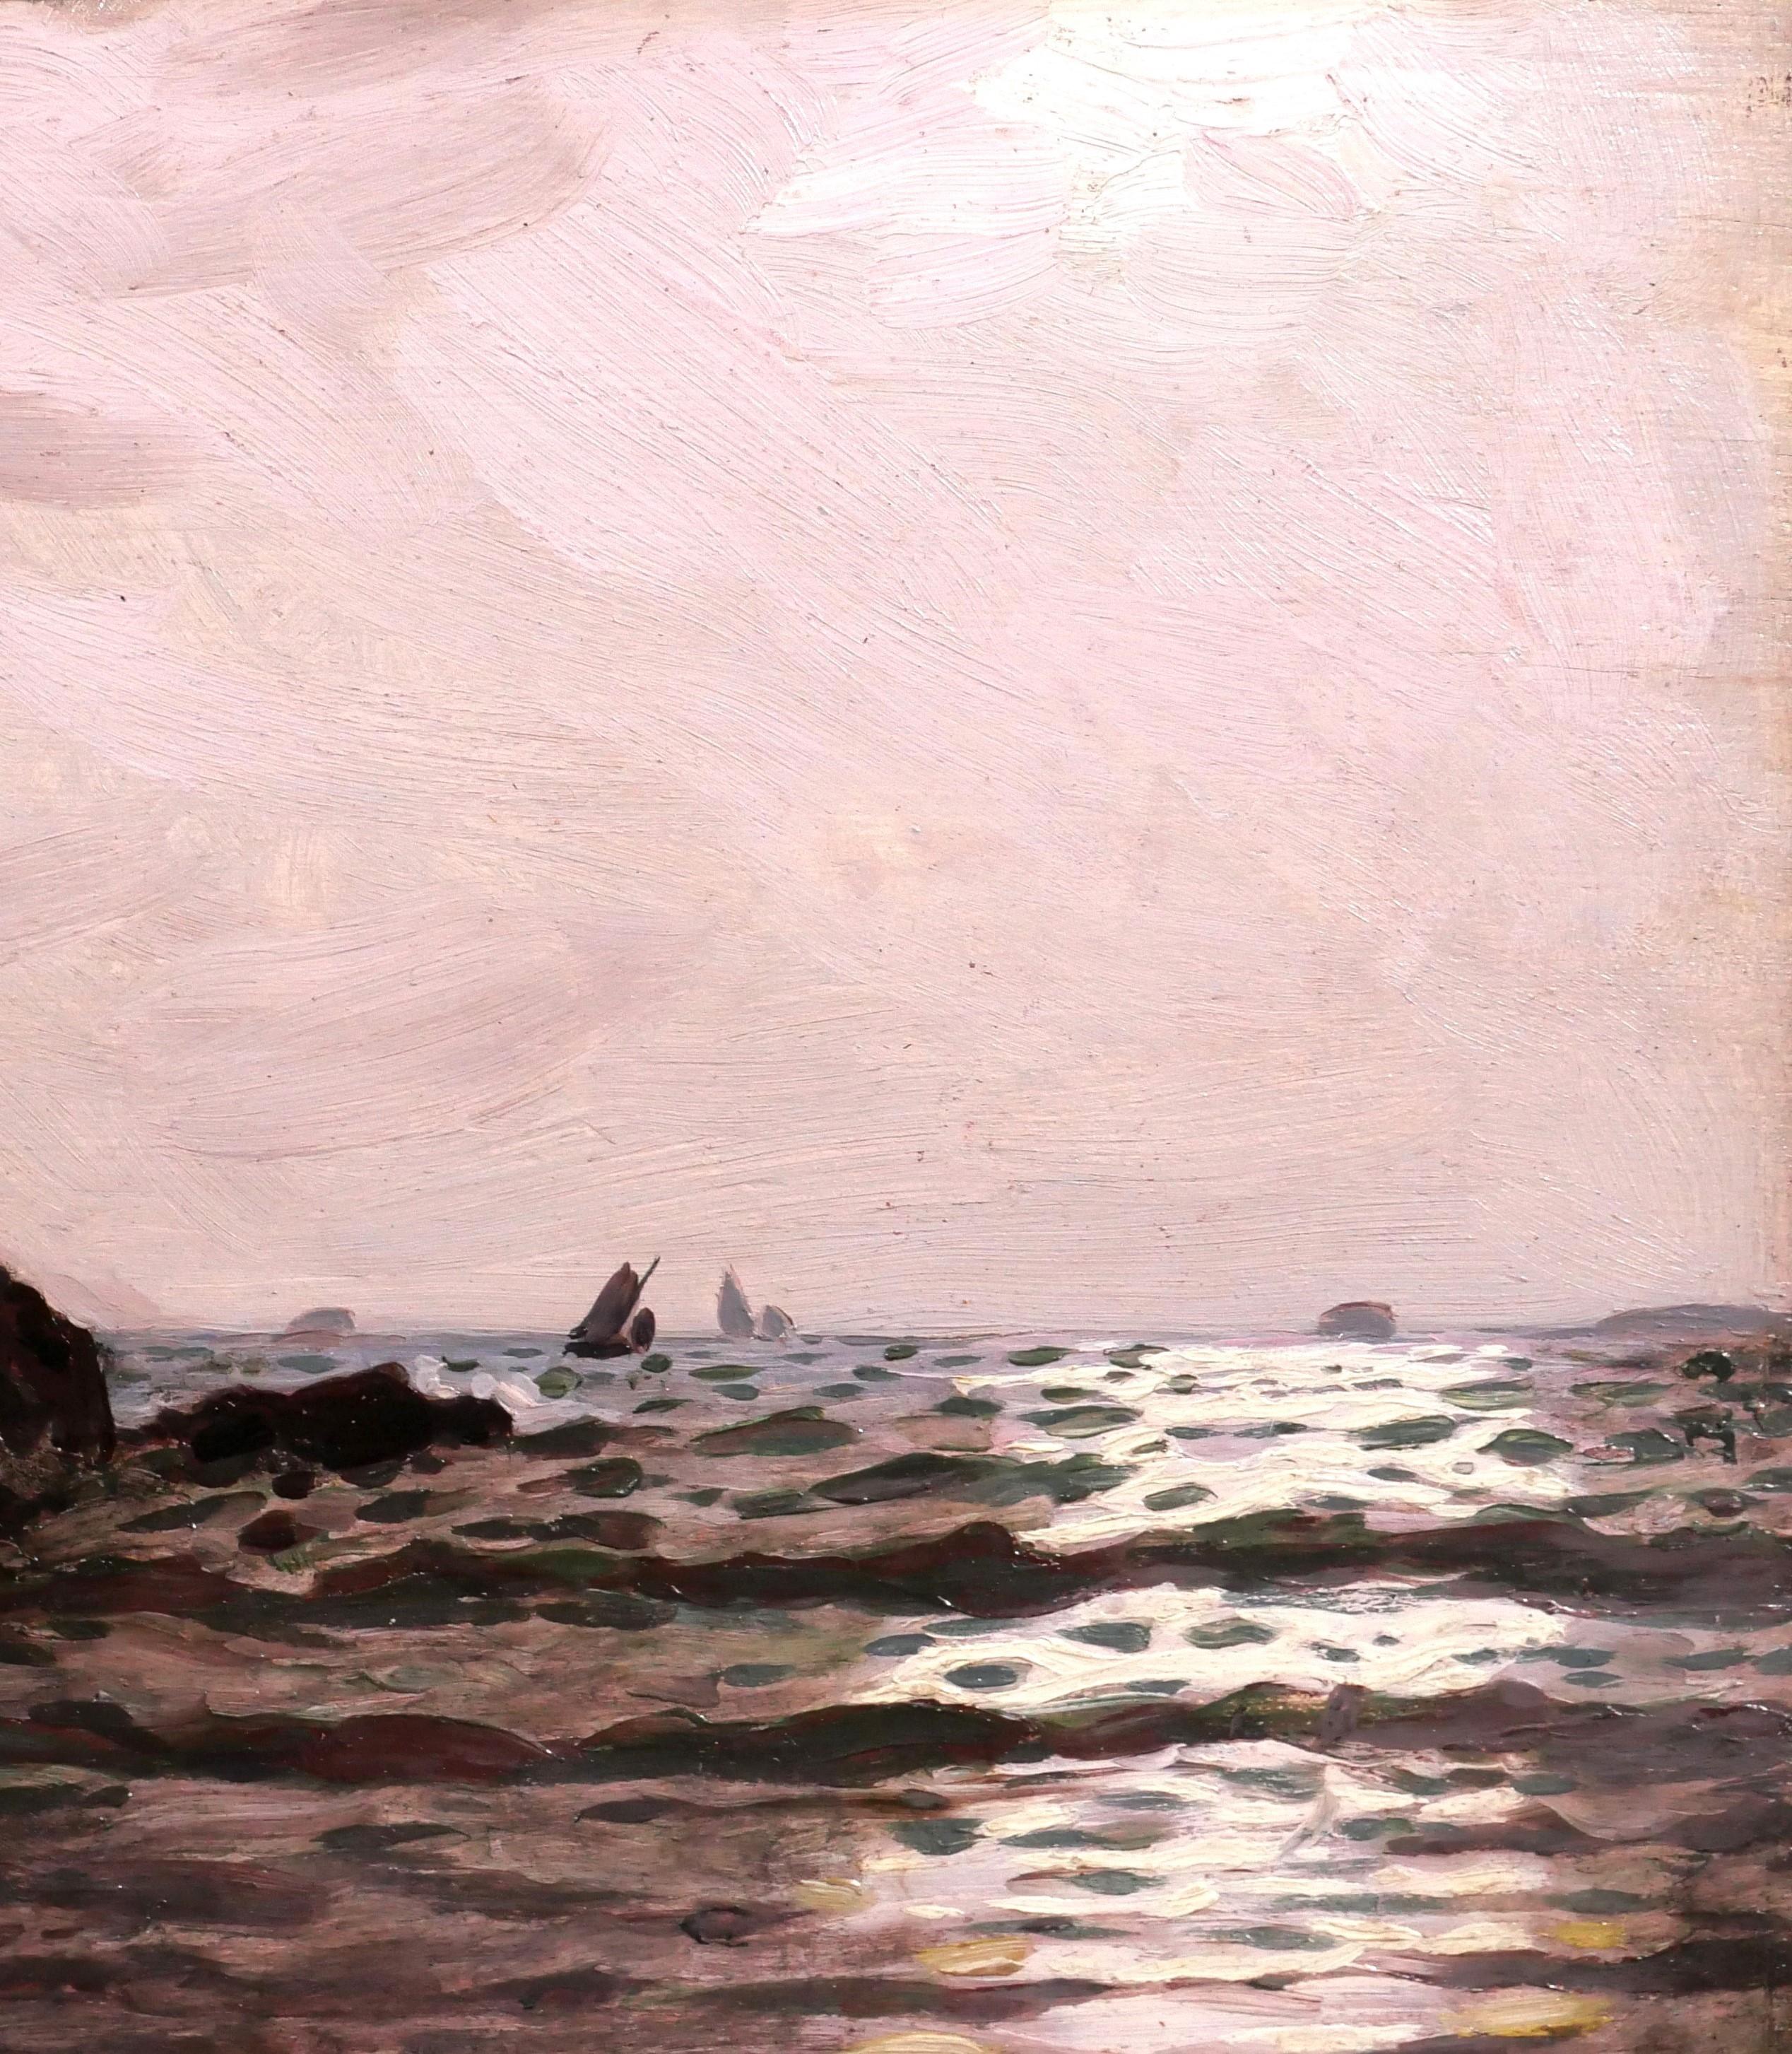 Seascape, play of light and chiaroscuro - Impressionist Painting by Alexandre Brun